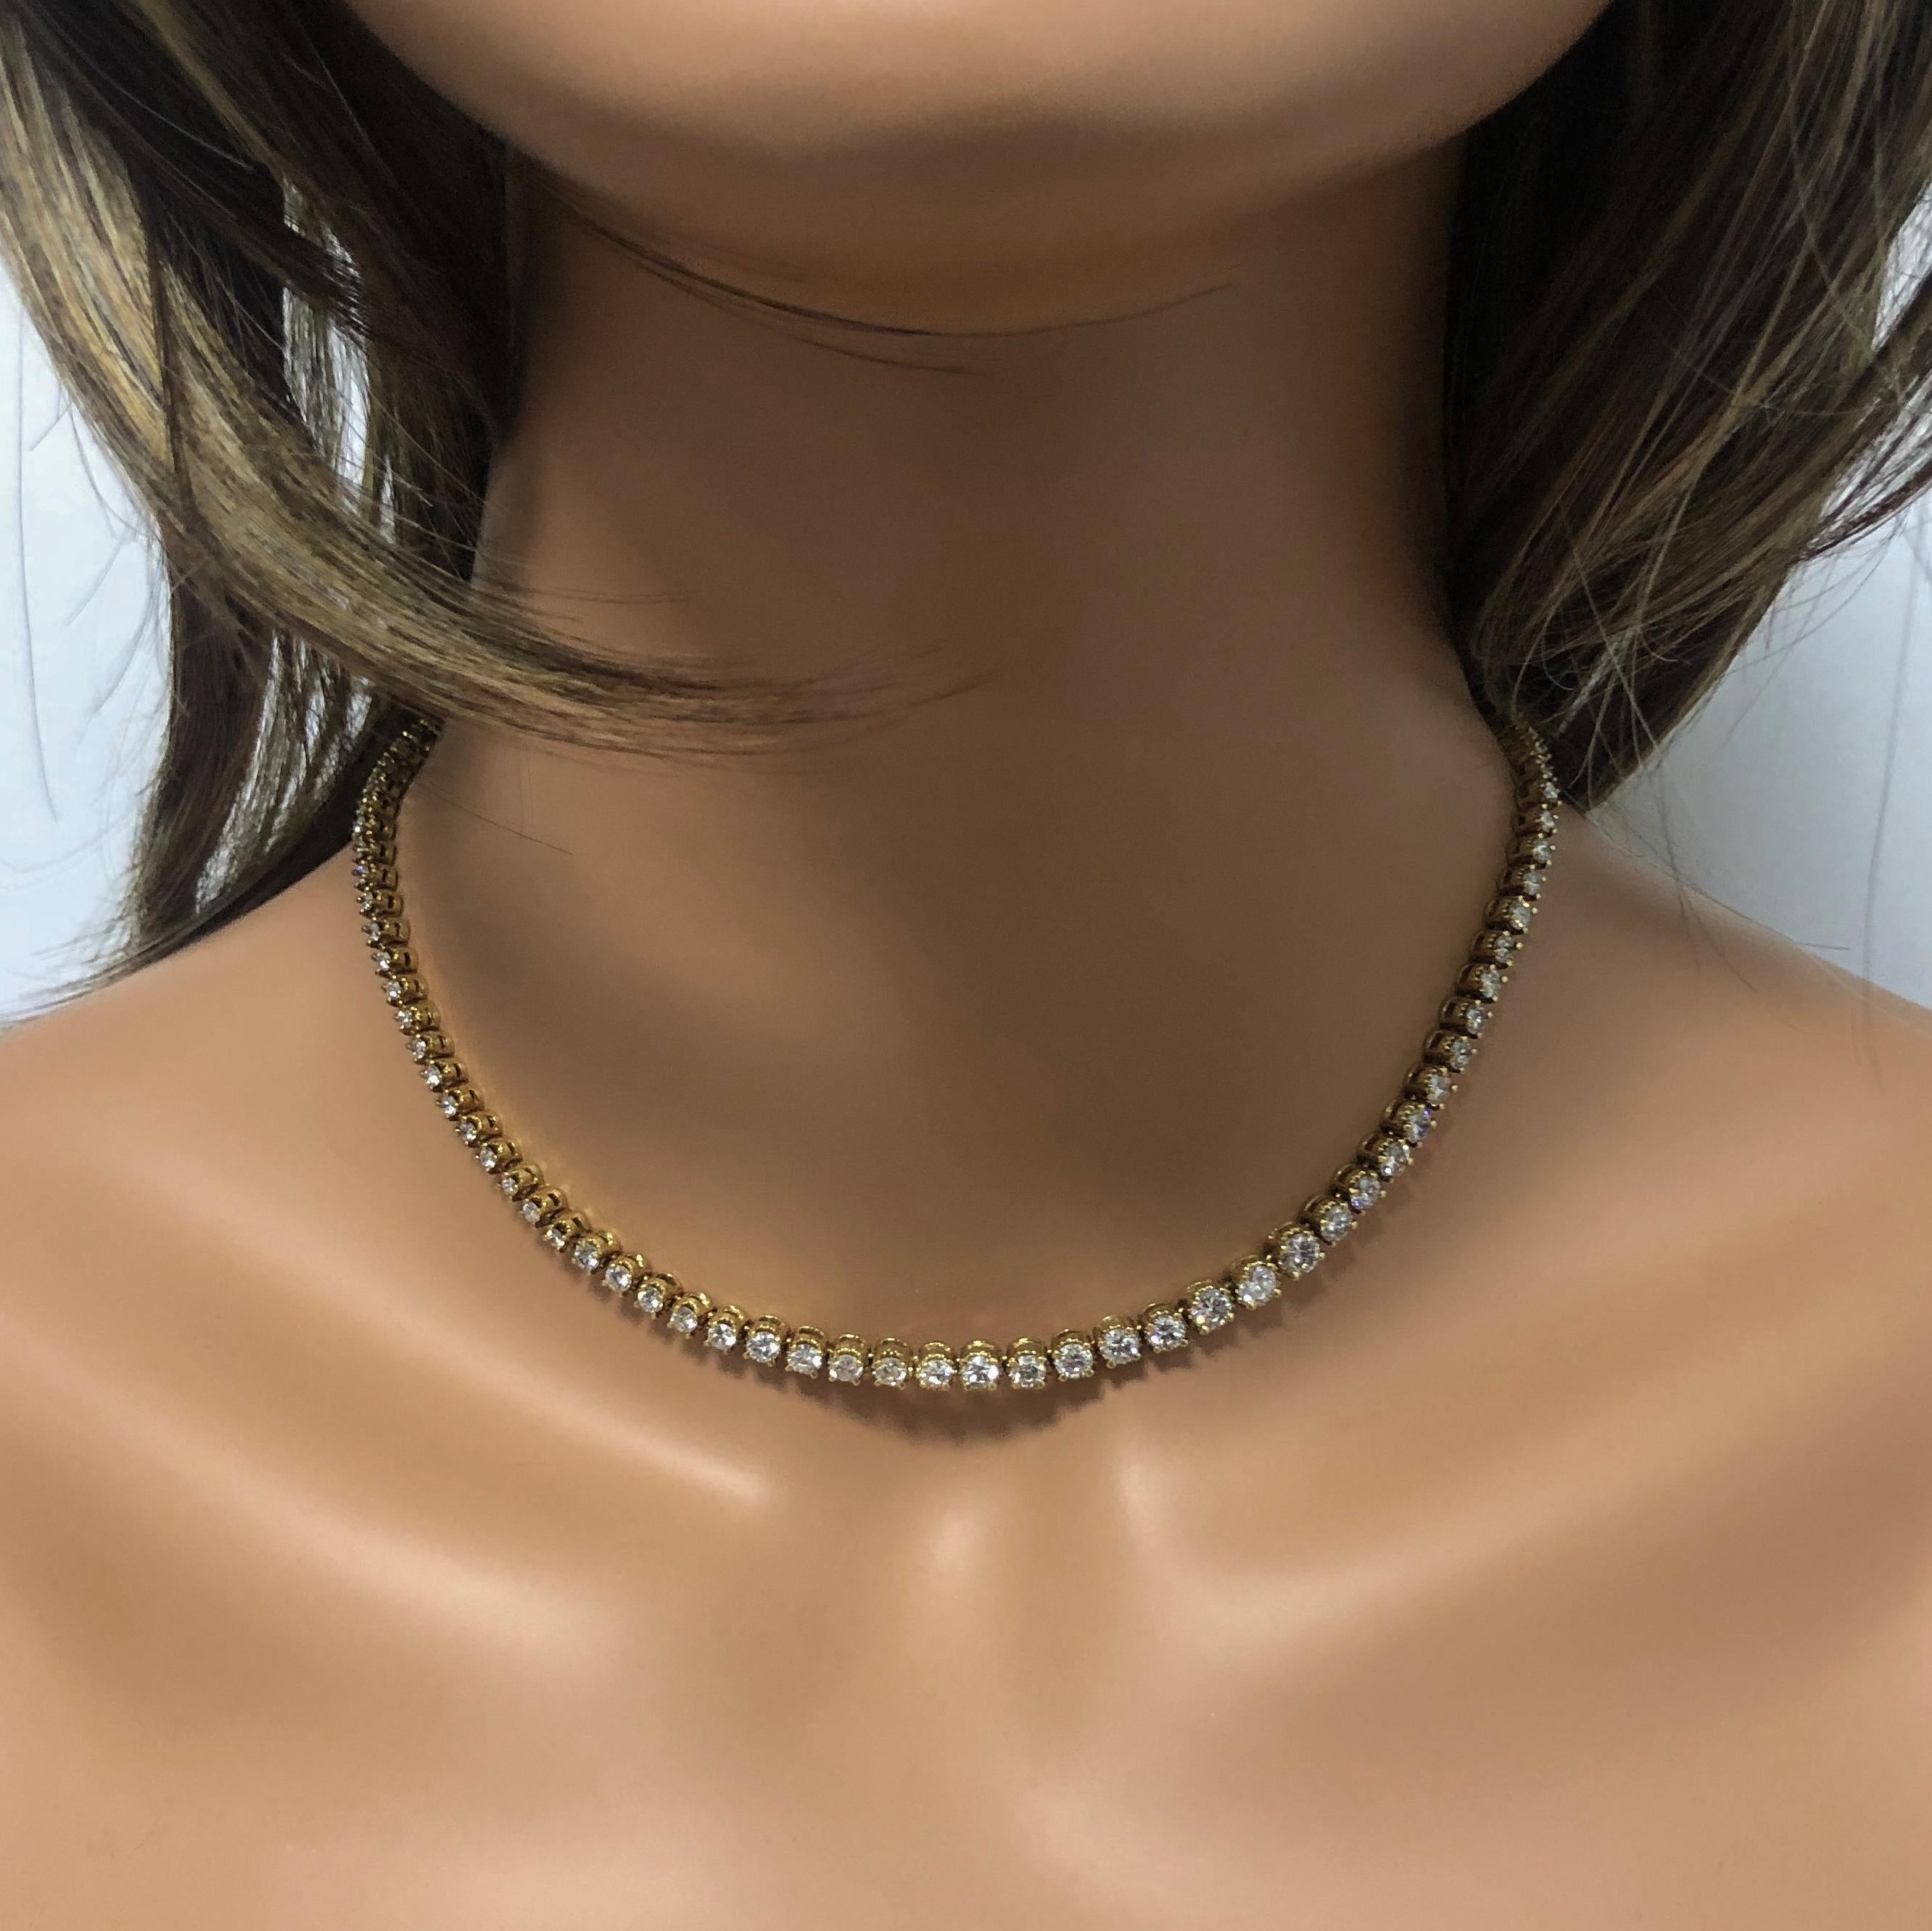 Sparkle in the spotlight with this magnificent and classy diamond necklace. Features 103 sparkling diamonds weighing 6.50 carats total. Each diamond graduates in size and is set in its own 18k yellow gold basket. A definite must have for anyone.